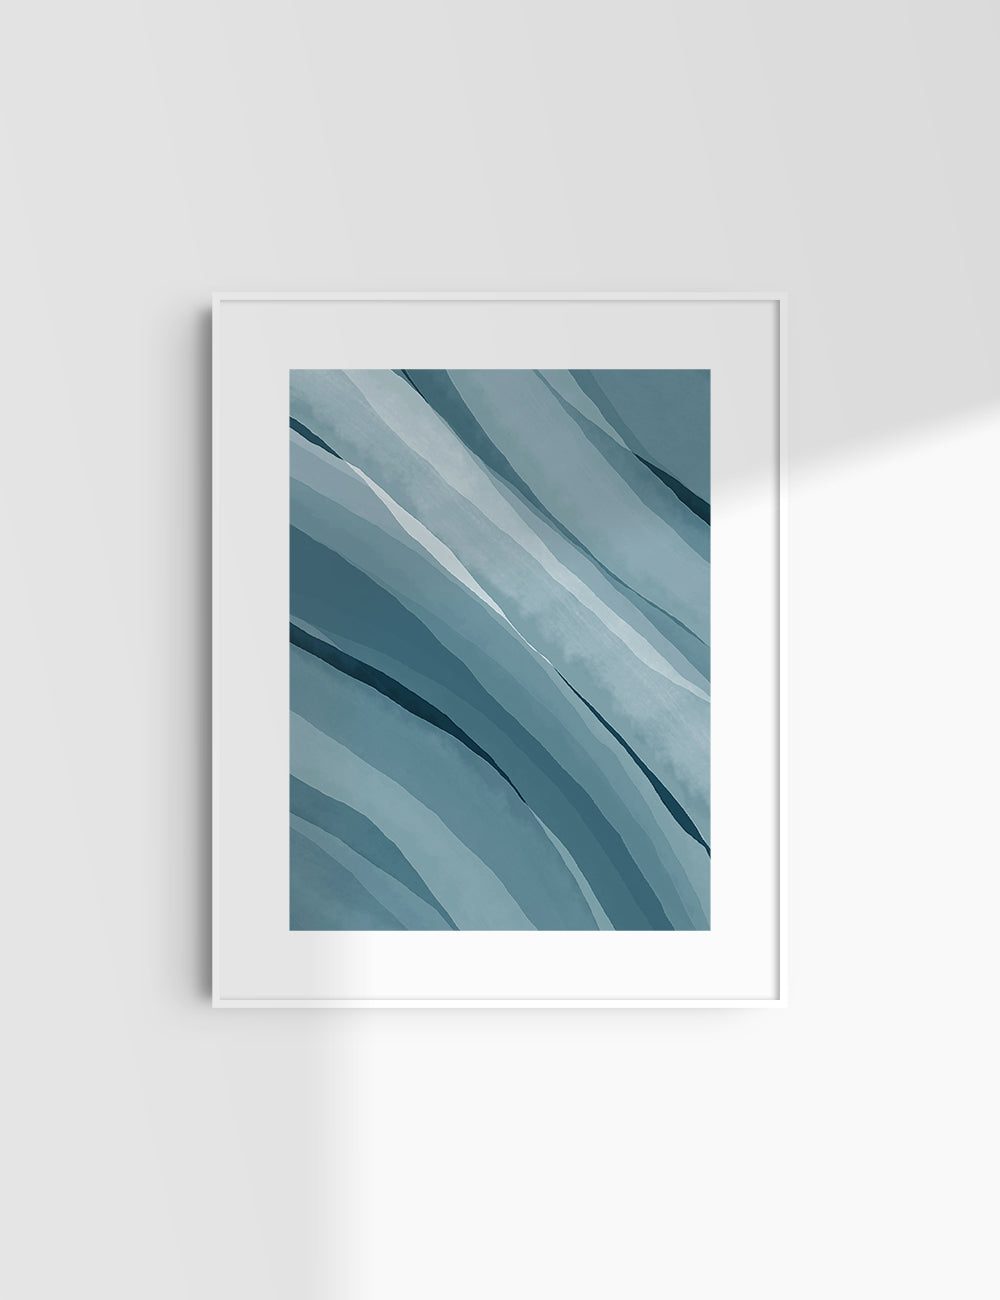 BLUE WATERCOLOR ABSTRACT. Aesthetic. Minimalist. Abstract Watercolor Painting. Printable Wall Art. - PAPER MOON Art & Design